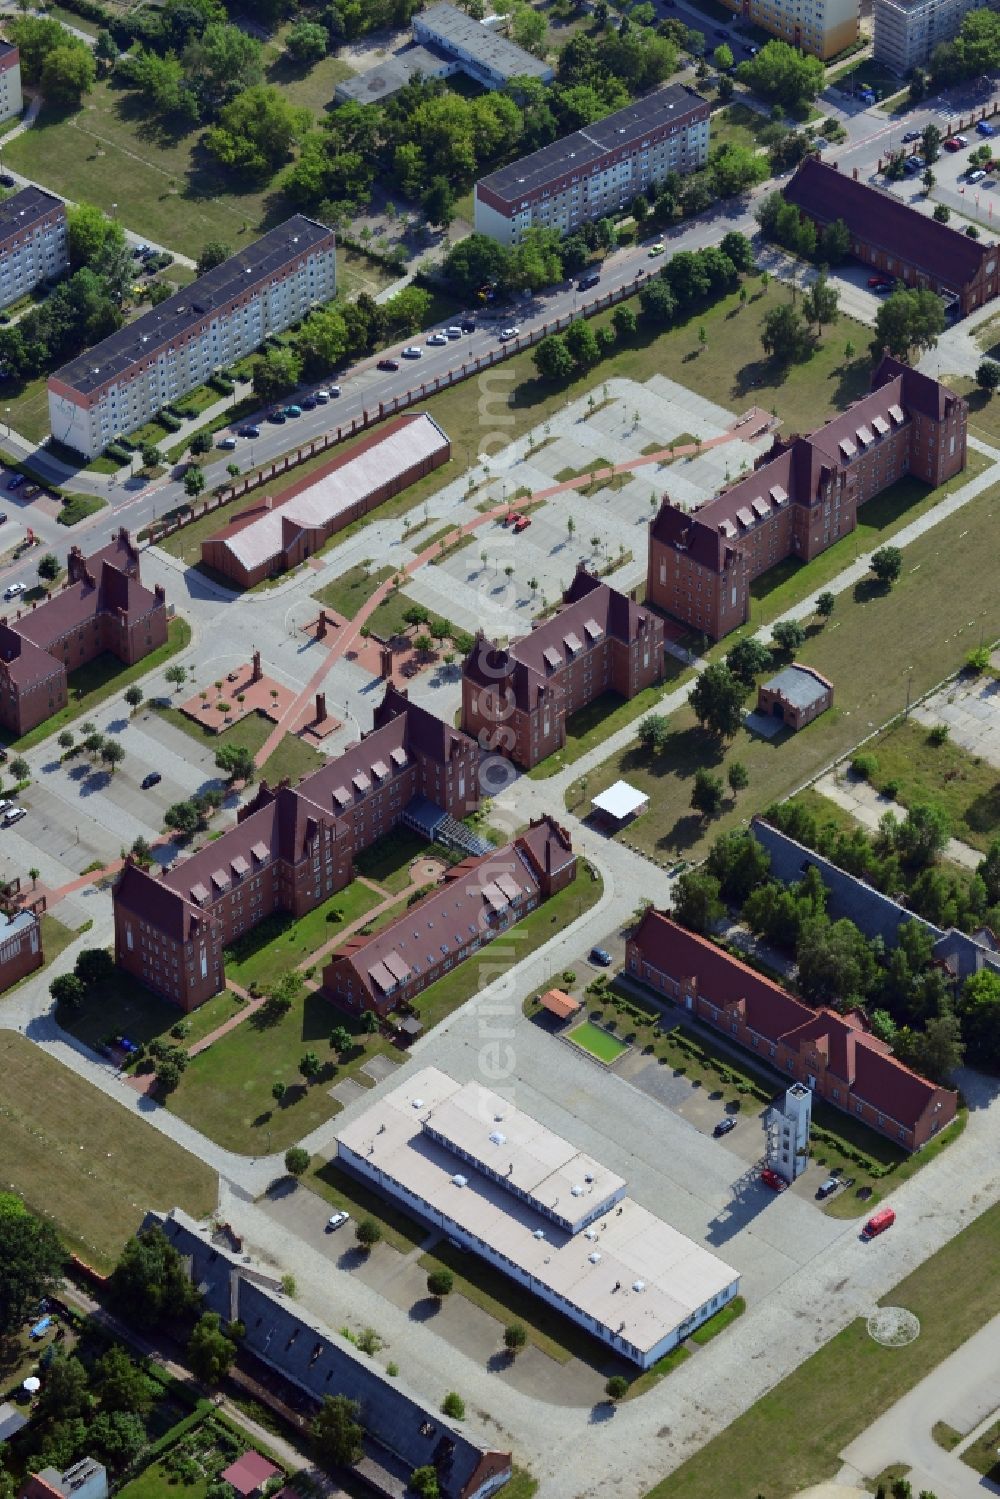 Aerial image Stendal - Cityscape of the compound at Scharnhorst Street in the city of Stendal in the stat of Saxony-Anhalt. The compound consists of the county court and the registration office